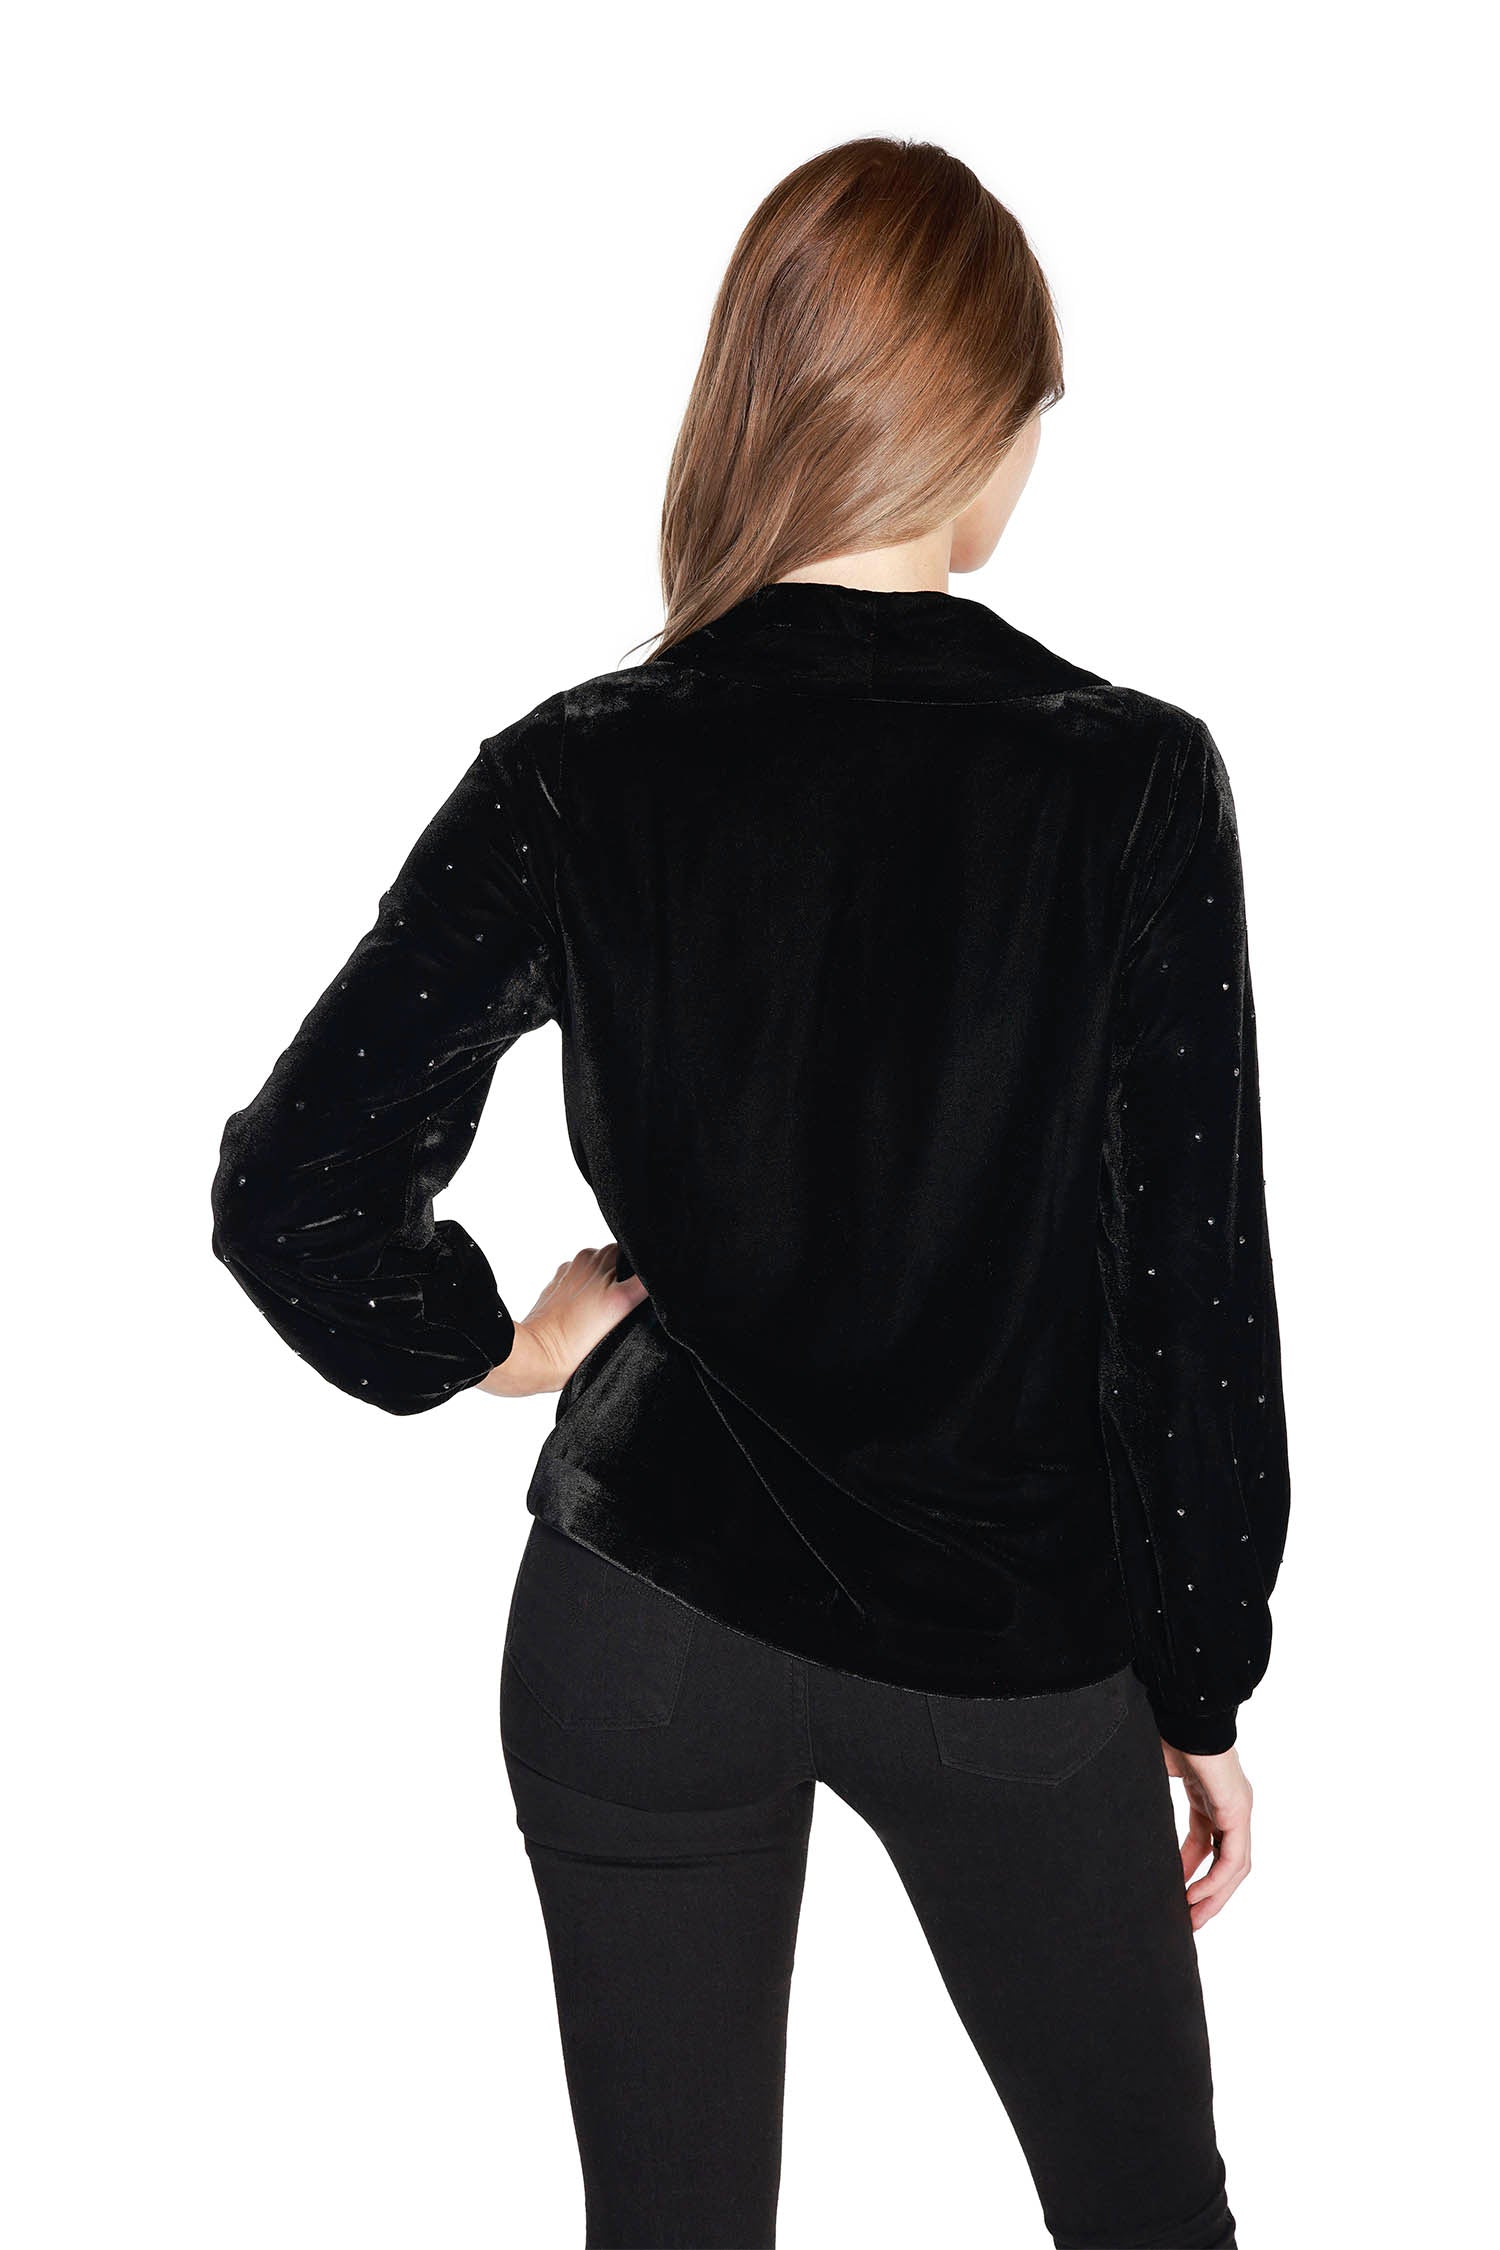 Women's Classic Stretch Velvet One Button Blazer with Blouson Sleeves and Rhinestone Detailing - LAST CALL